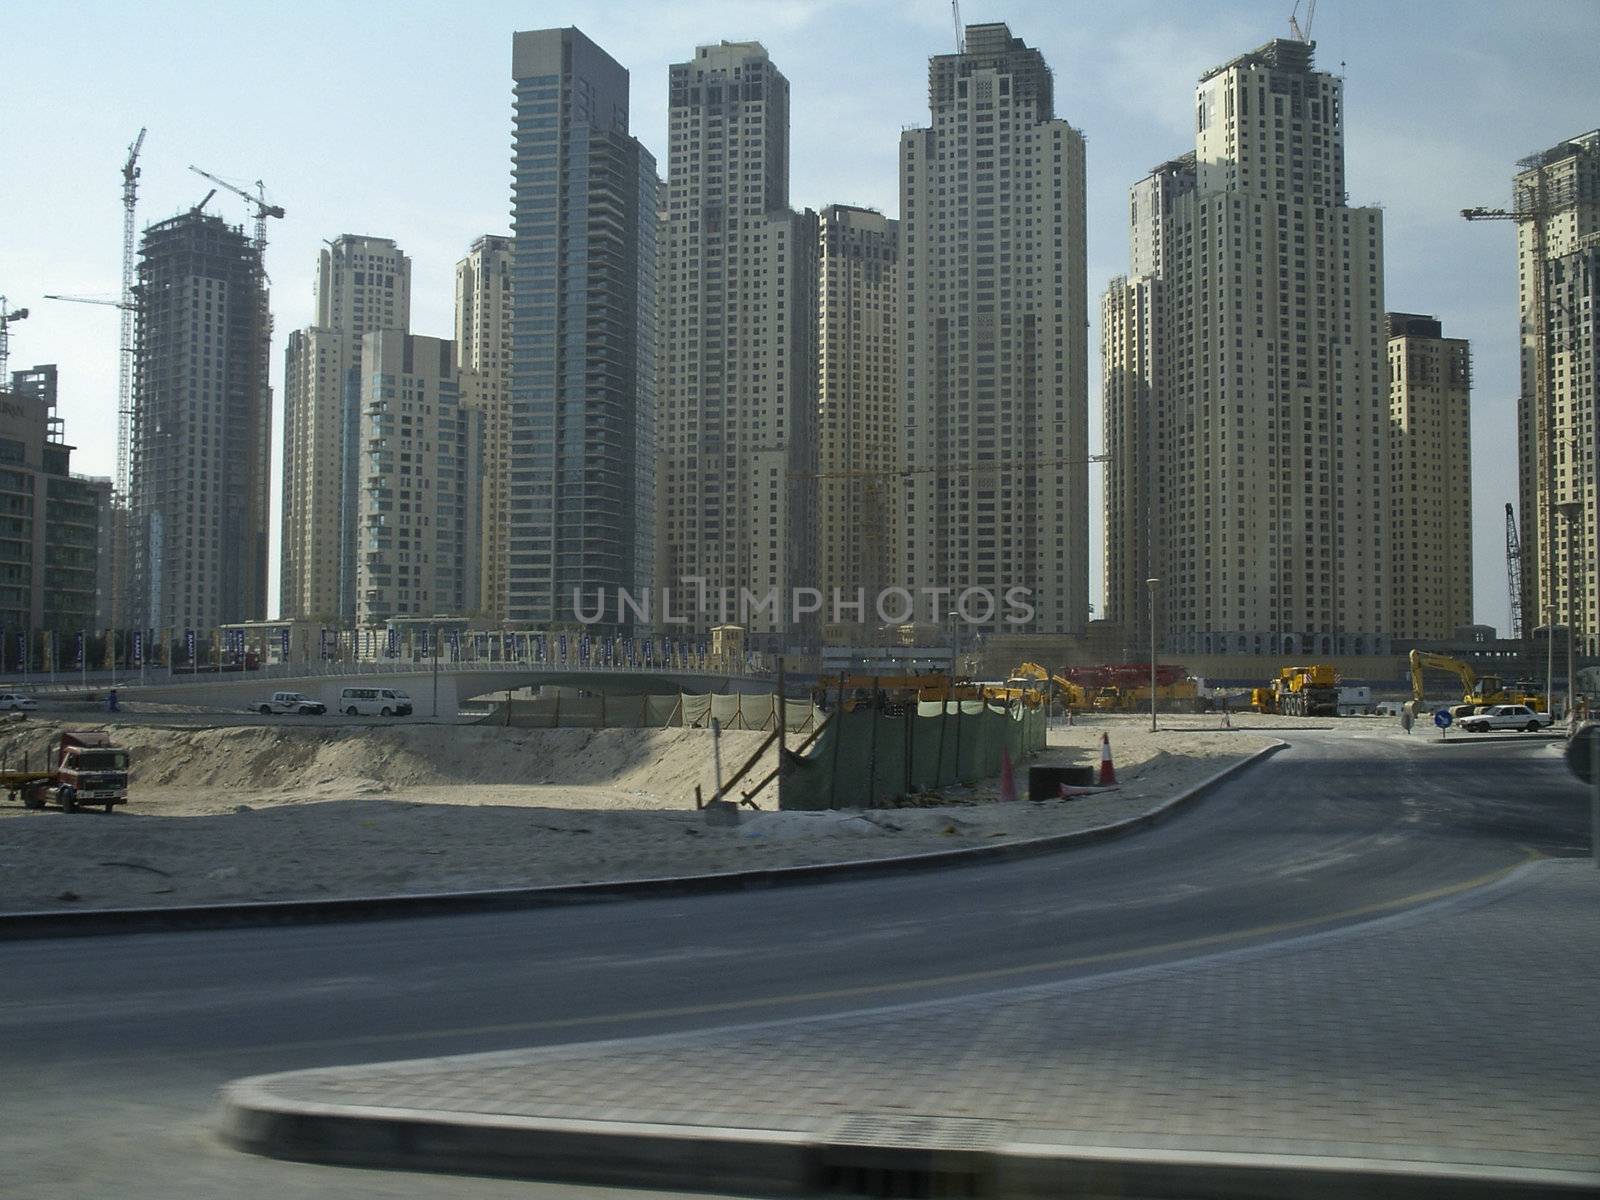 The palm, Dubai in construction by cvail73